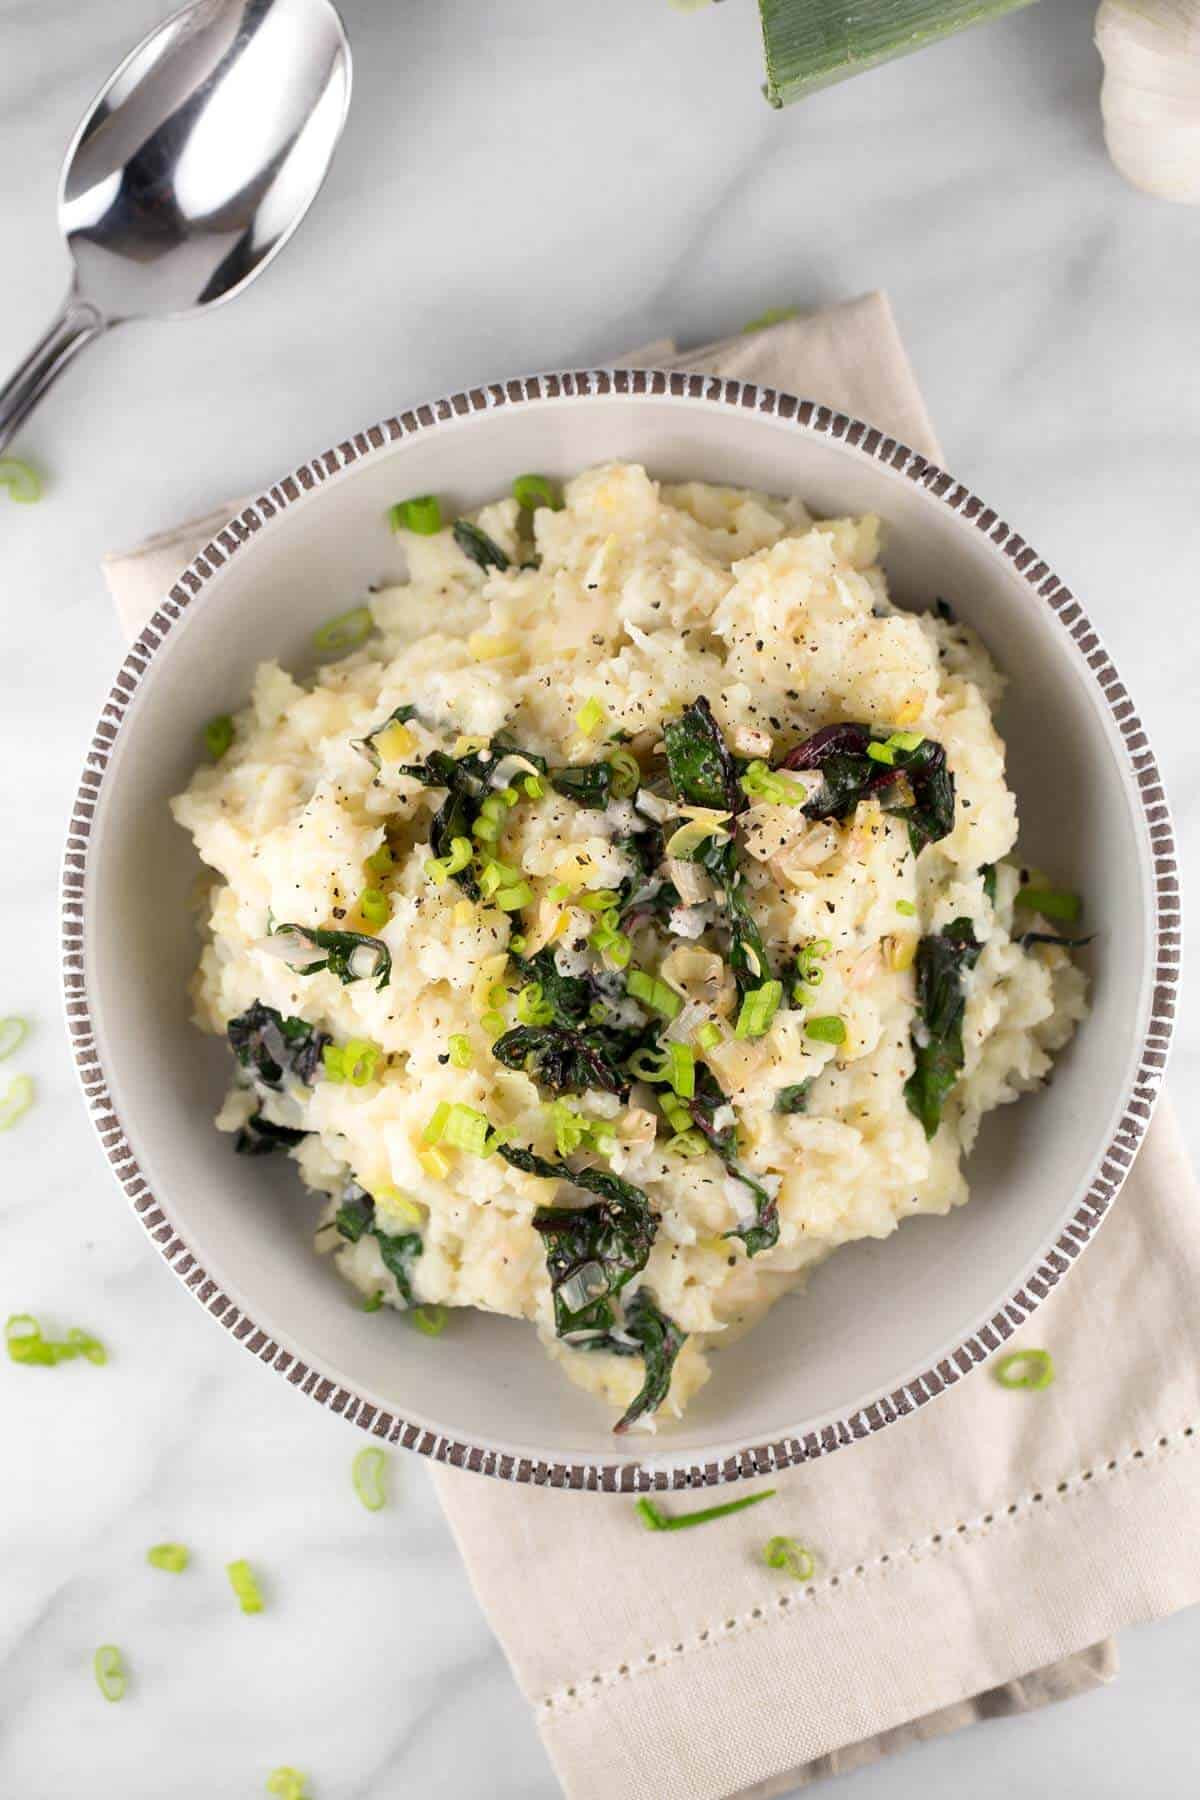 Healthy Mashed Potatoes Recipe
 healthy cauliflower mashed potatoes recipe